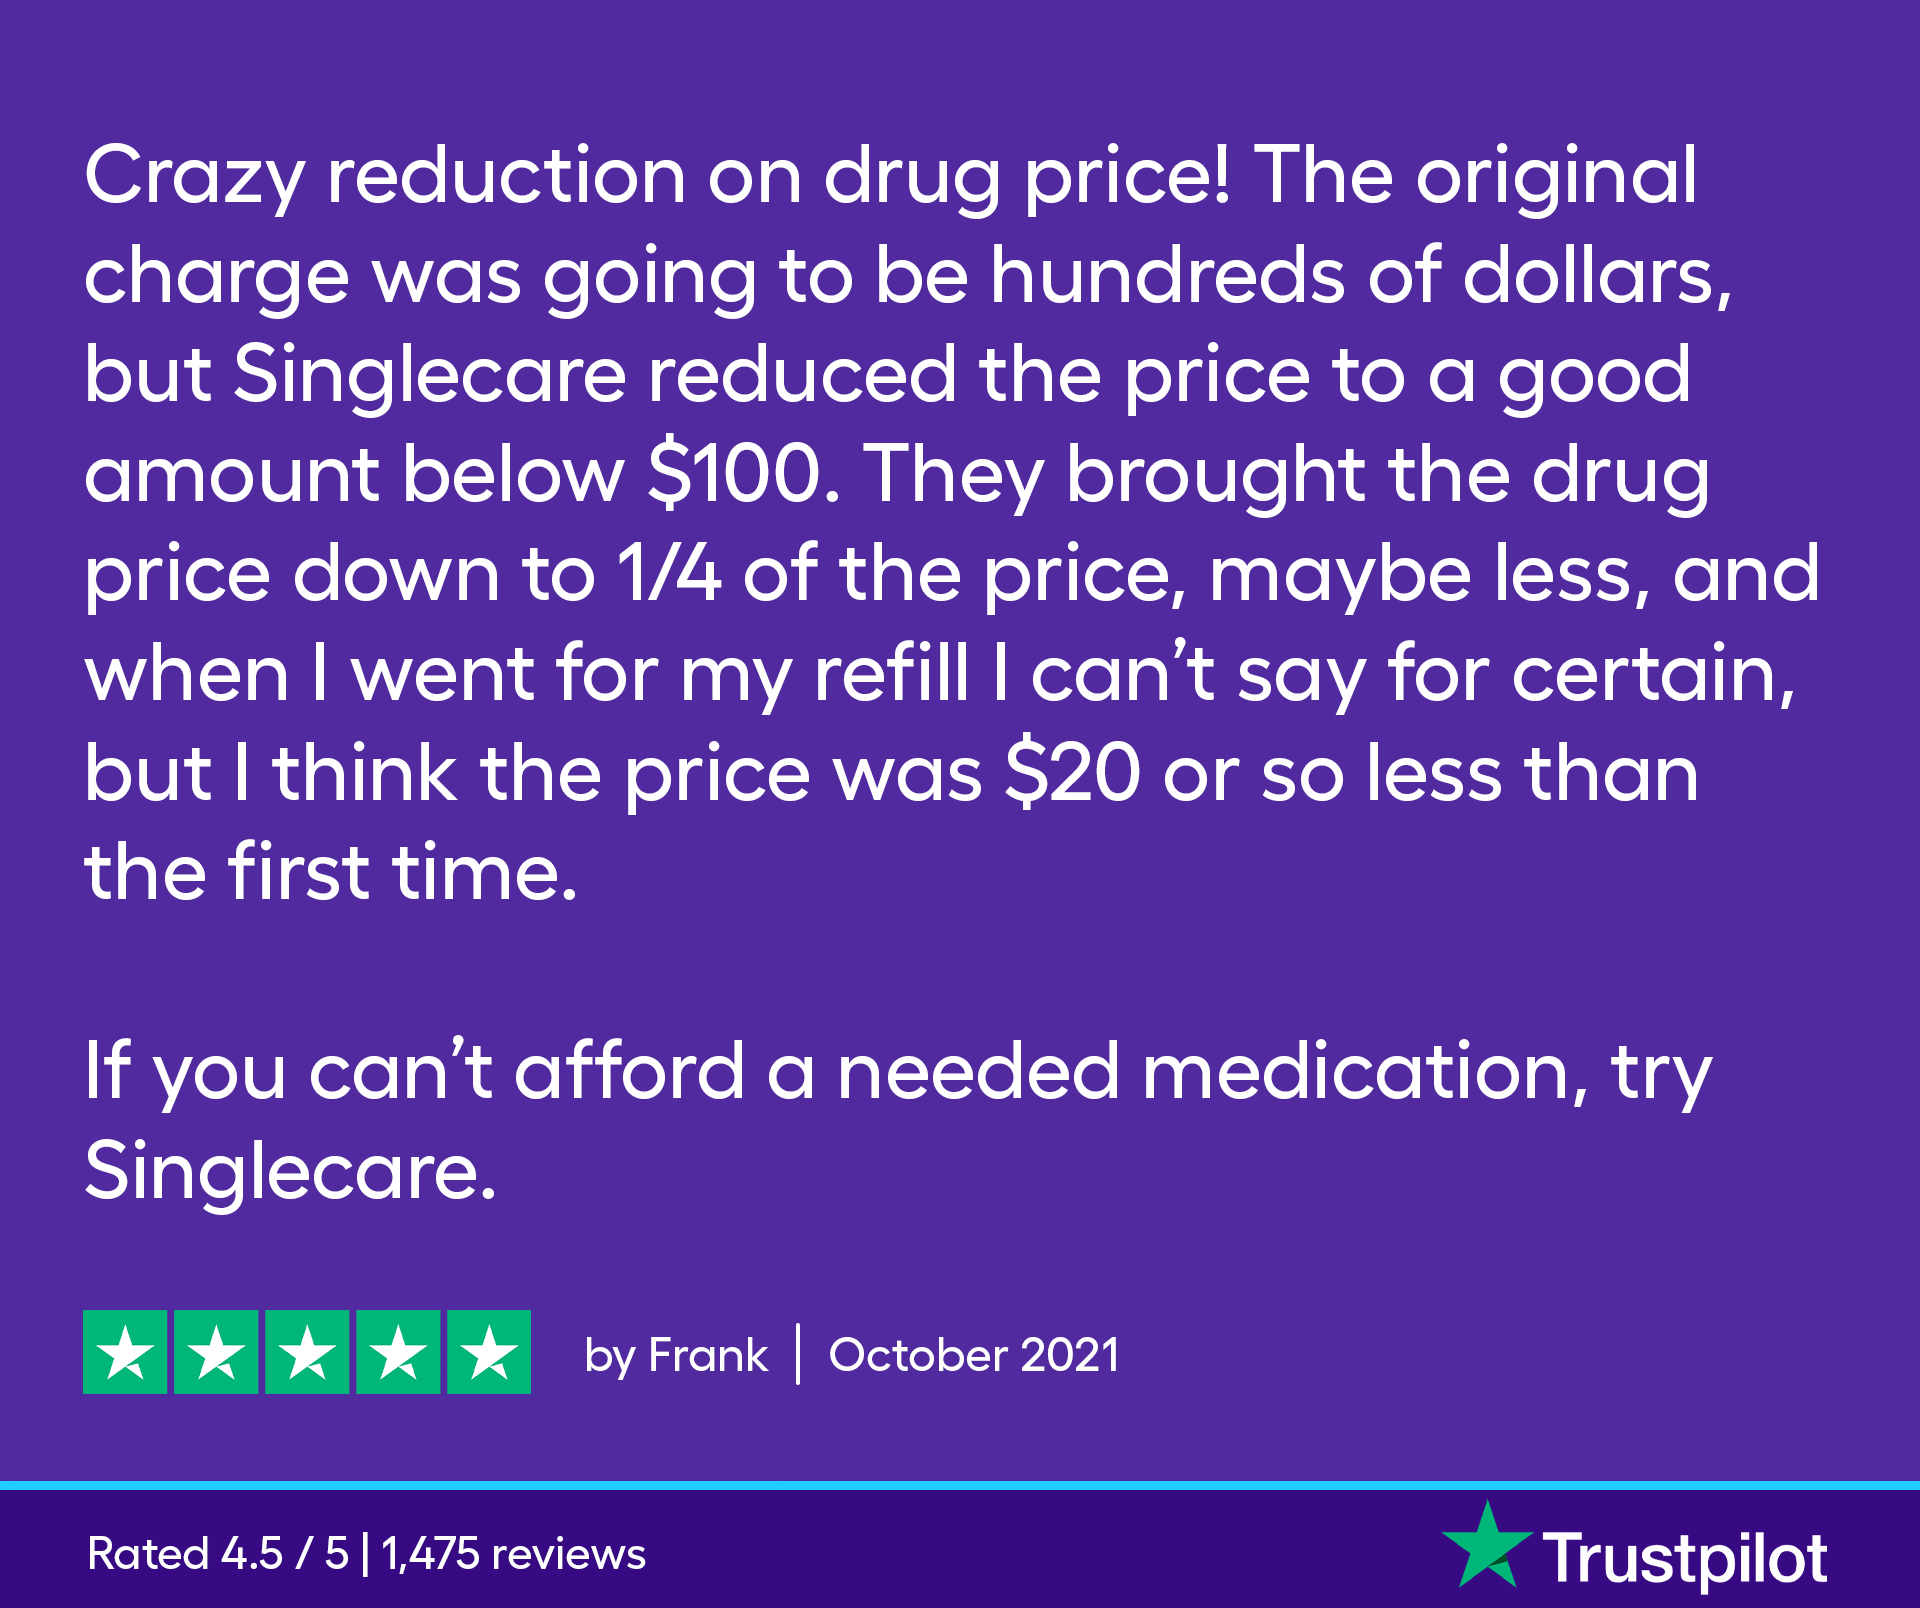 Crazy reduction on drug price! The original charge was going to be hundreds of dollars, but Singlecare reduced the price to a good amount below $100. They brought the drug price down to 1/4 of the price, maybe less, and when I went for my refill I can't say for certain, but I think the price was $20 or so less than the first time. If you can't afford a needed medication, try SingleCare.